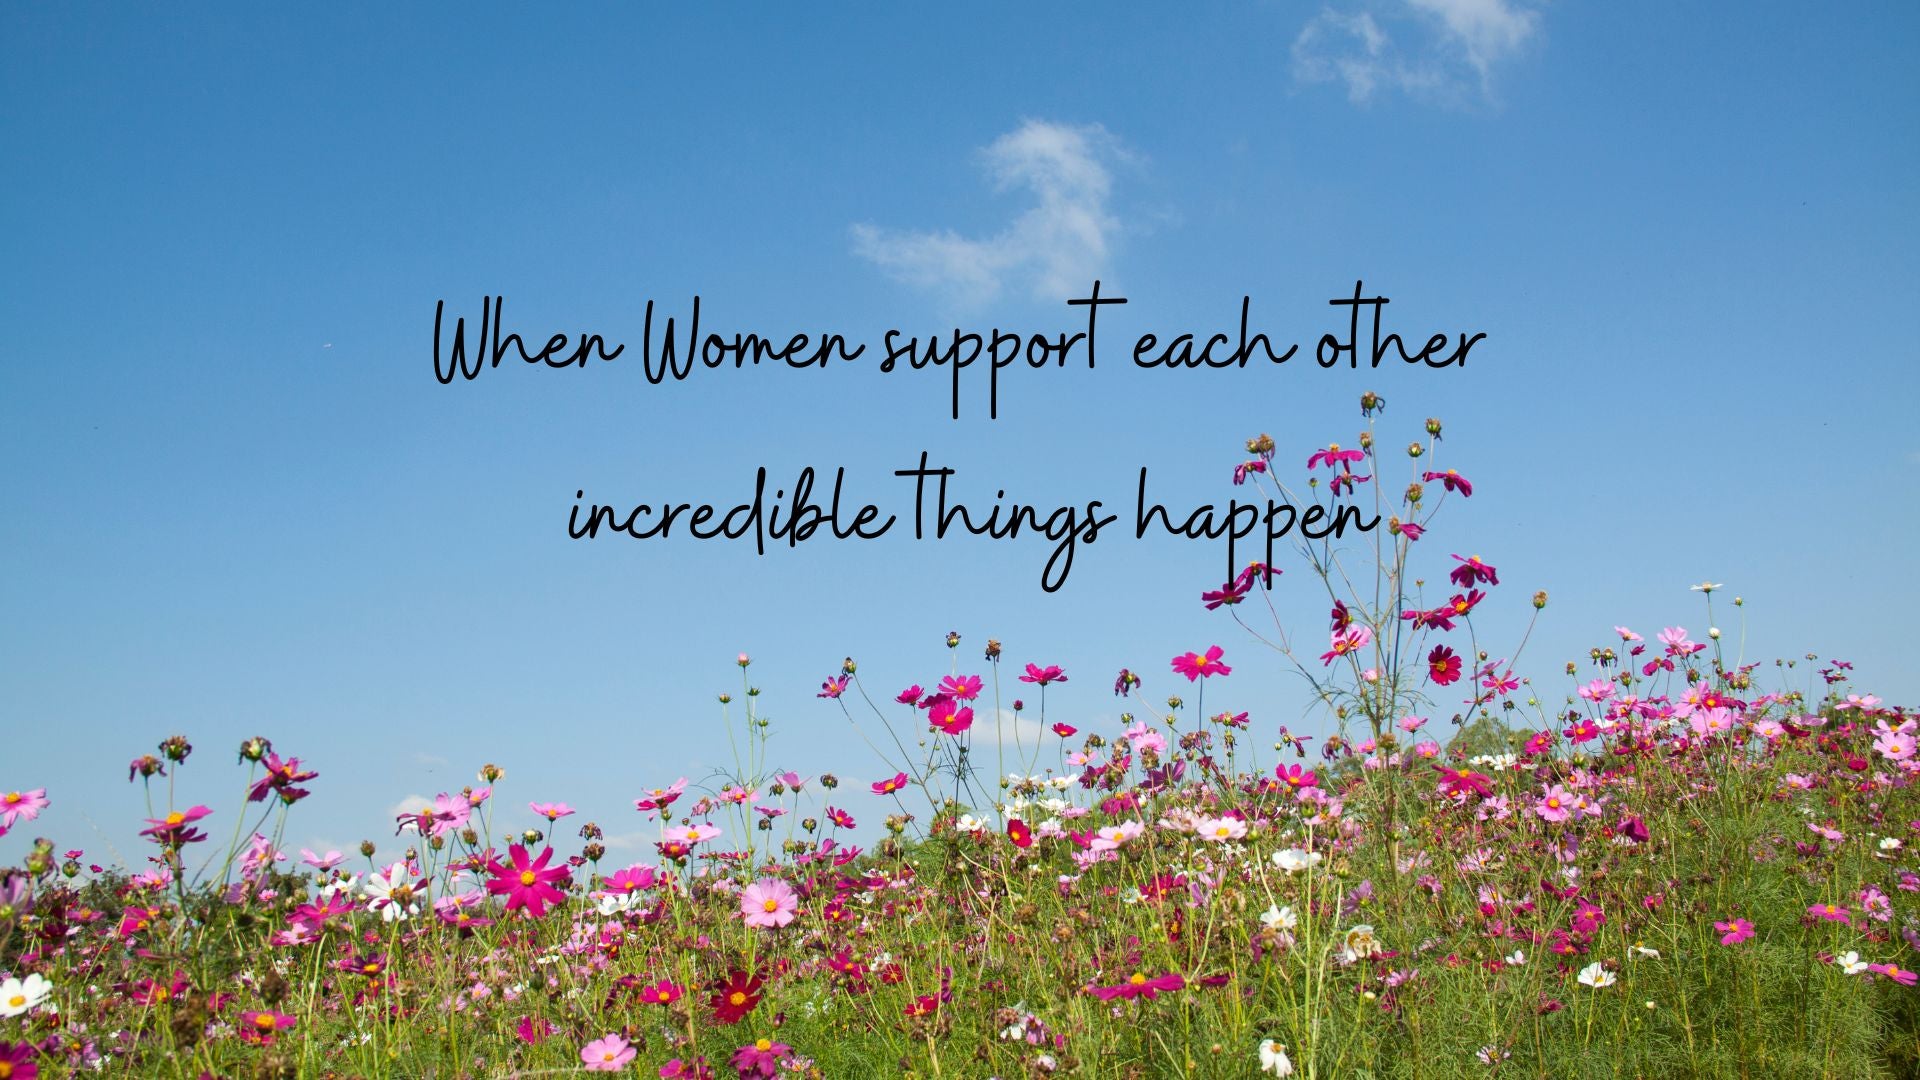 When Women support each other incredible things happen!